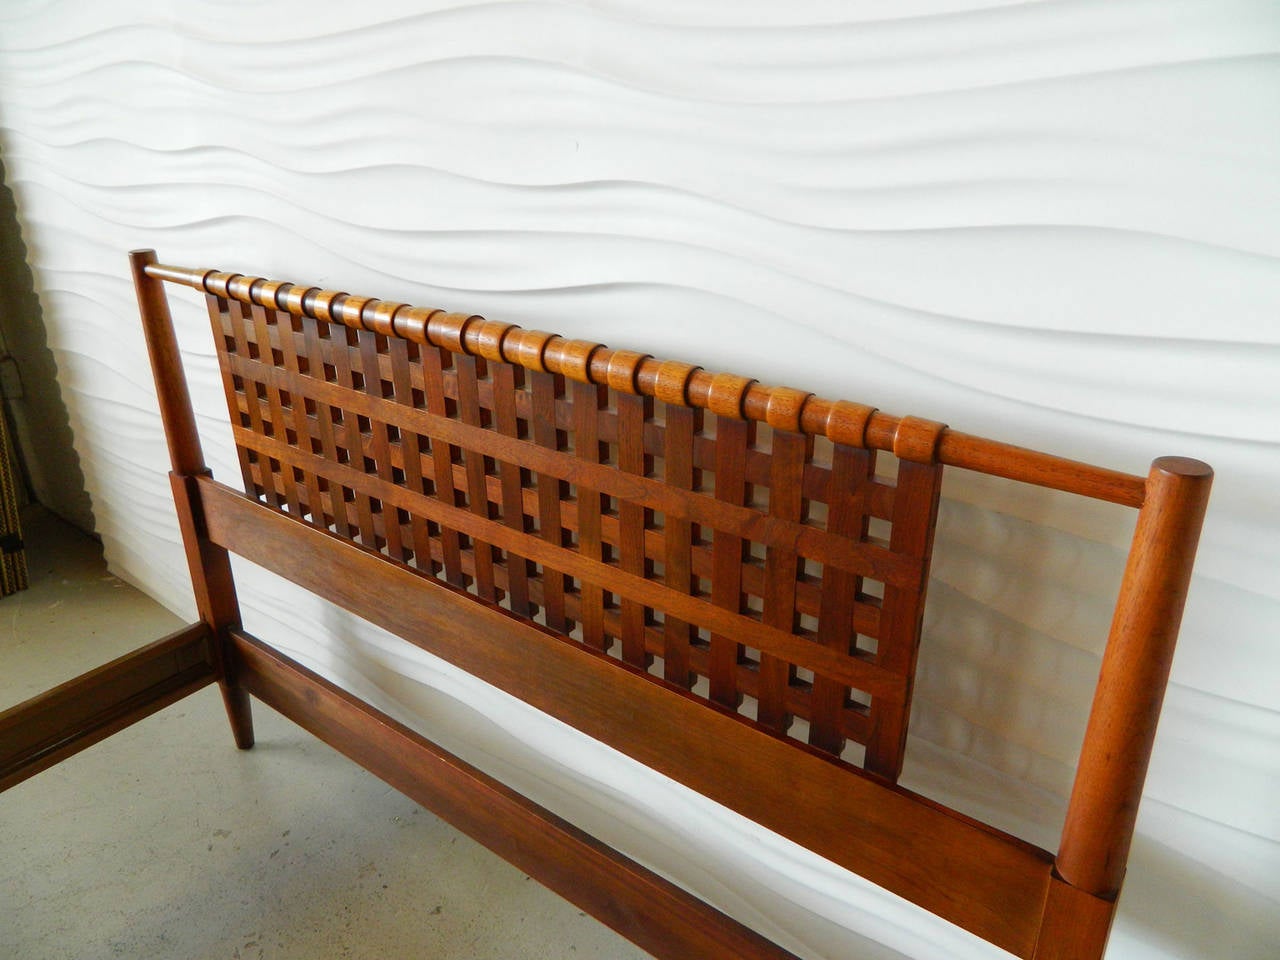 This handsome American modern double bed frame has a lattice-style headboard. The turned wood top rail gives the appearance of a wrapped edge. The bed includes a headboard, footboard, two metal side rails and four wooden slats.